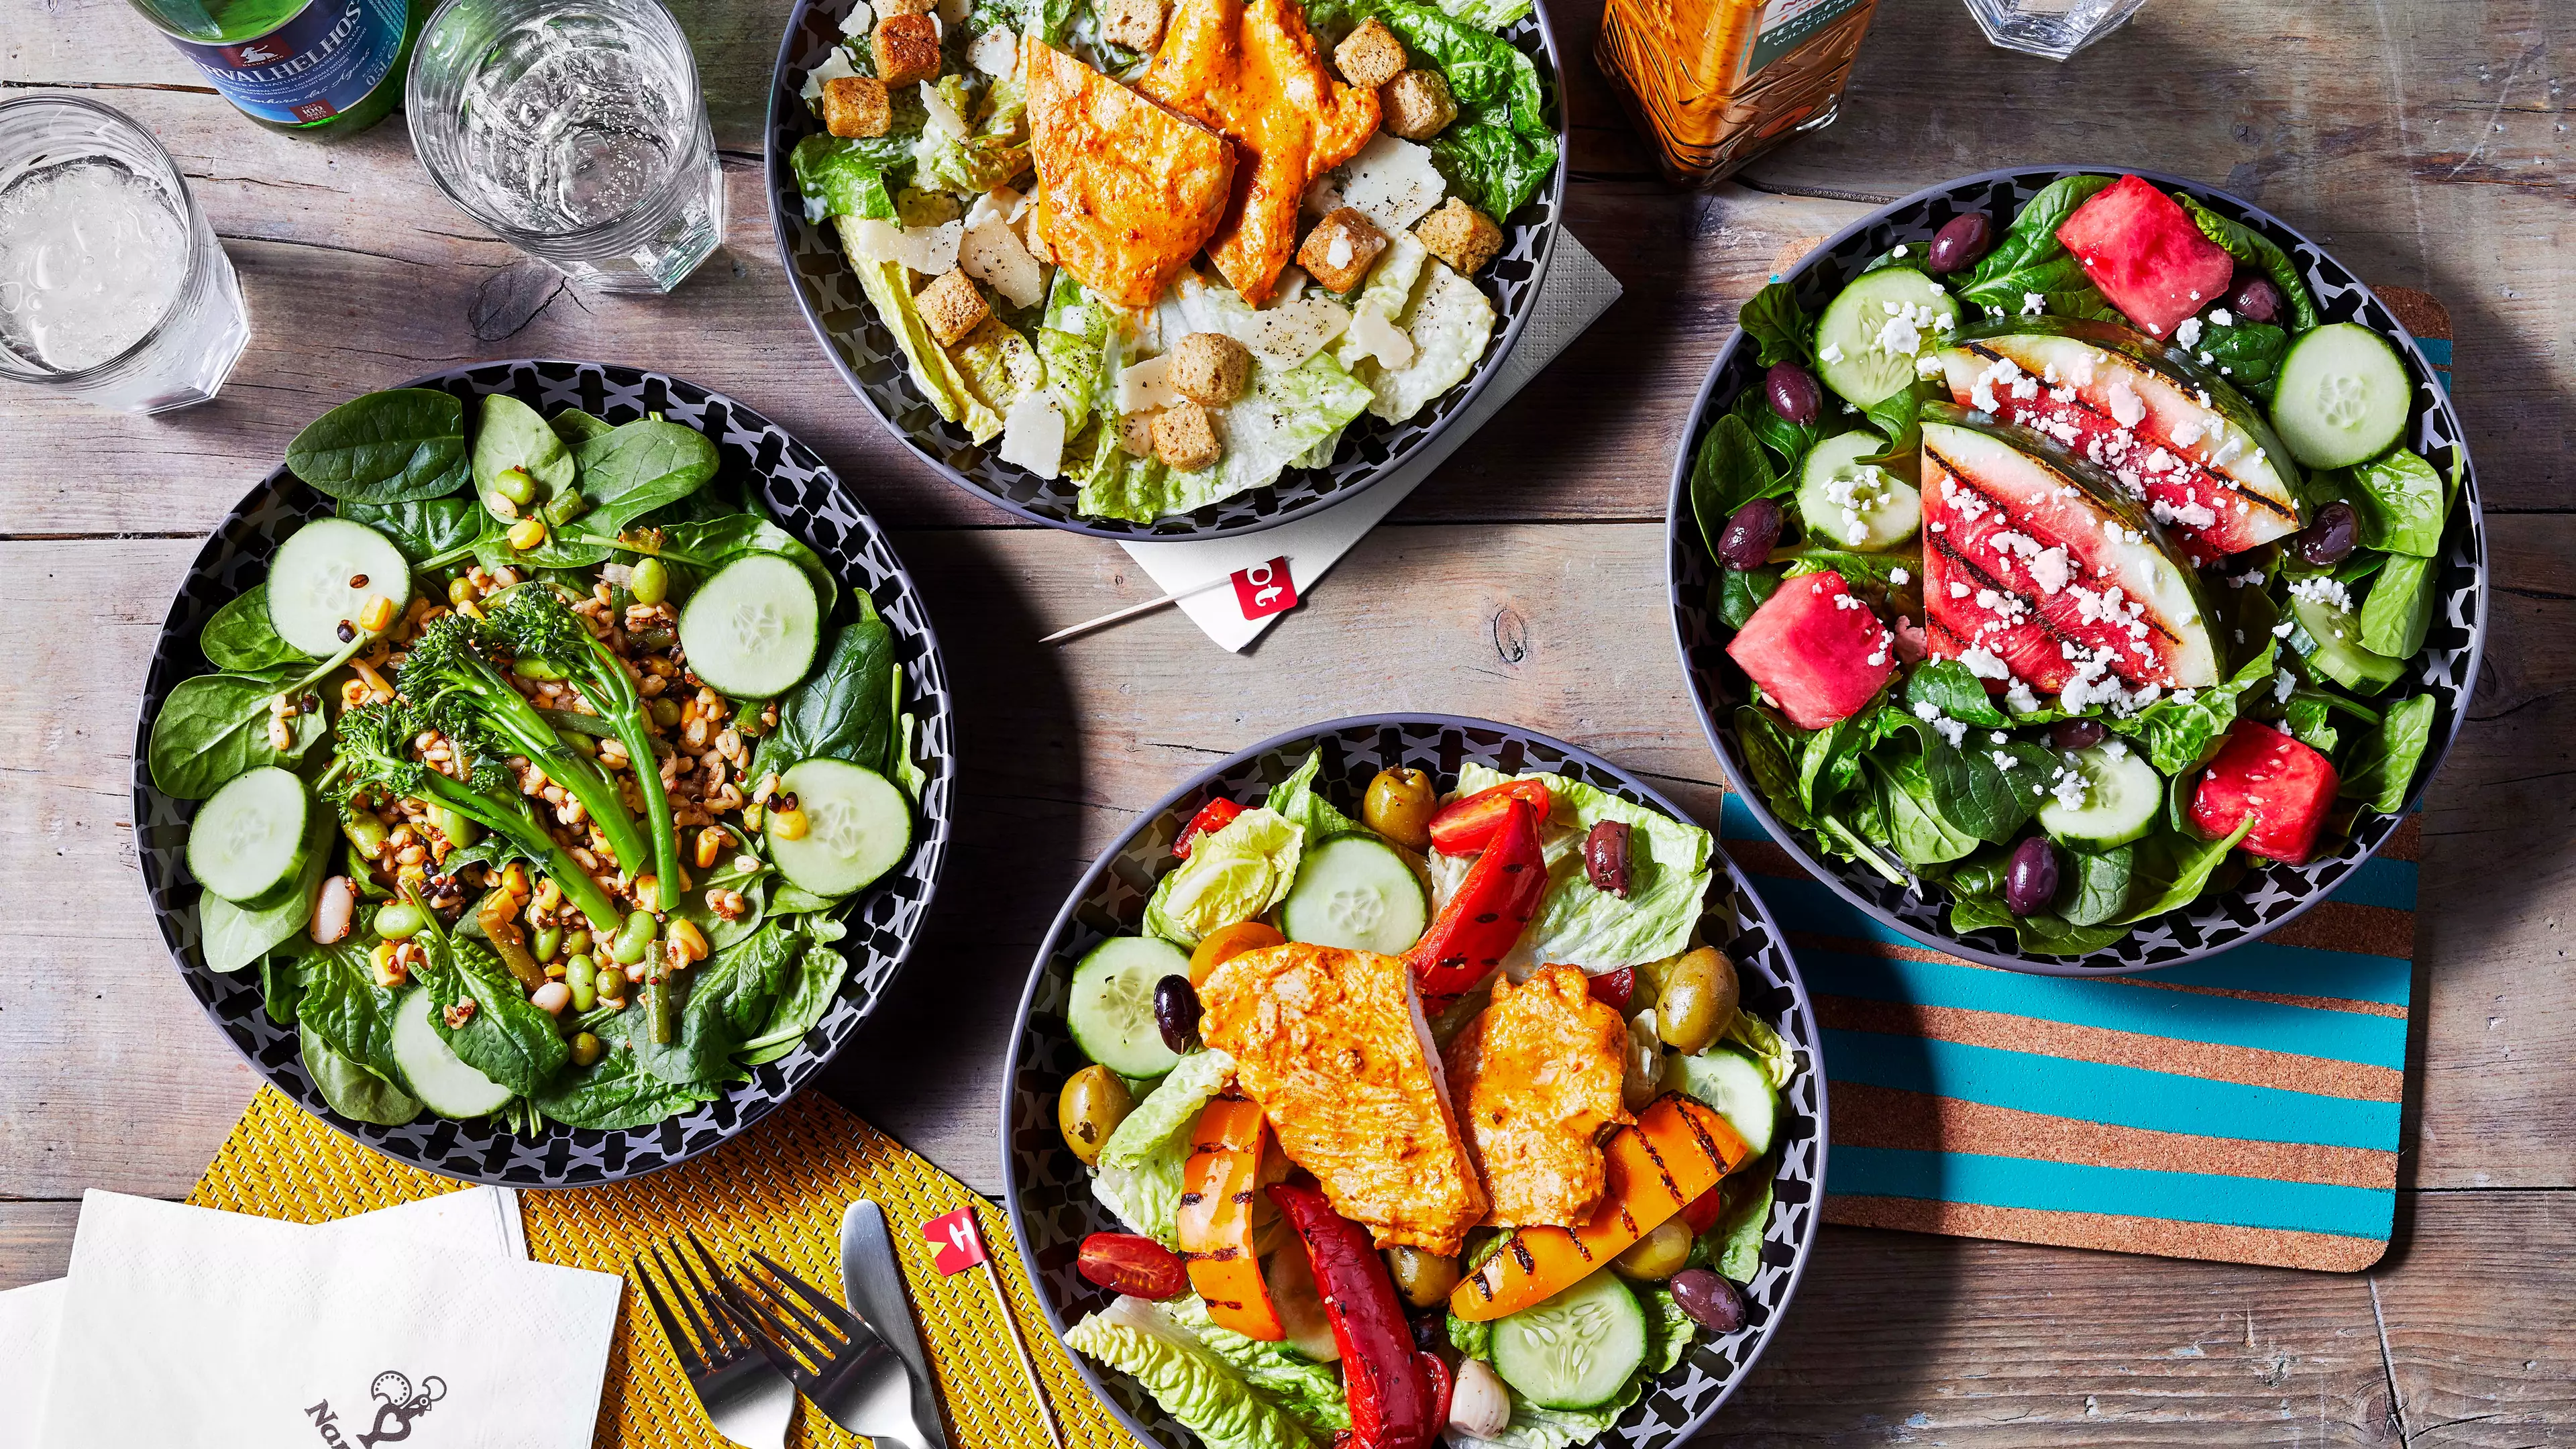 Nando's Just Launched A Mouth-Watering New Summer Menu